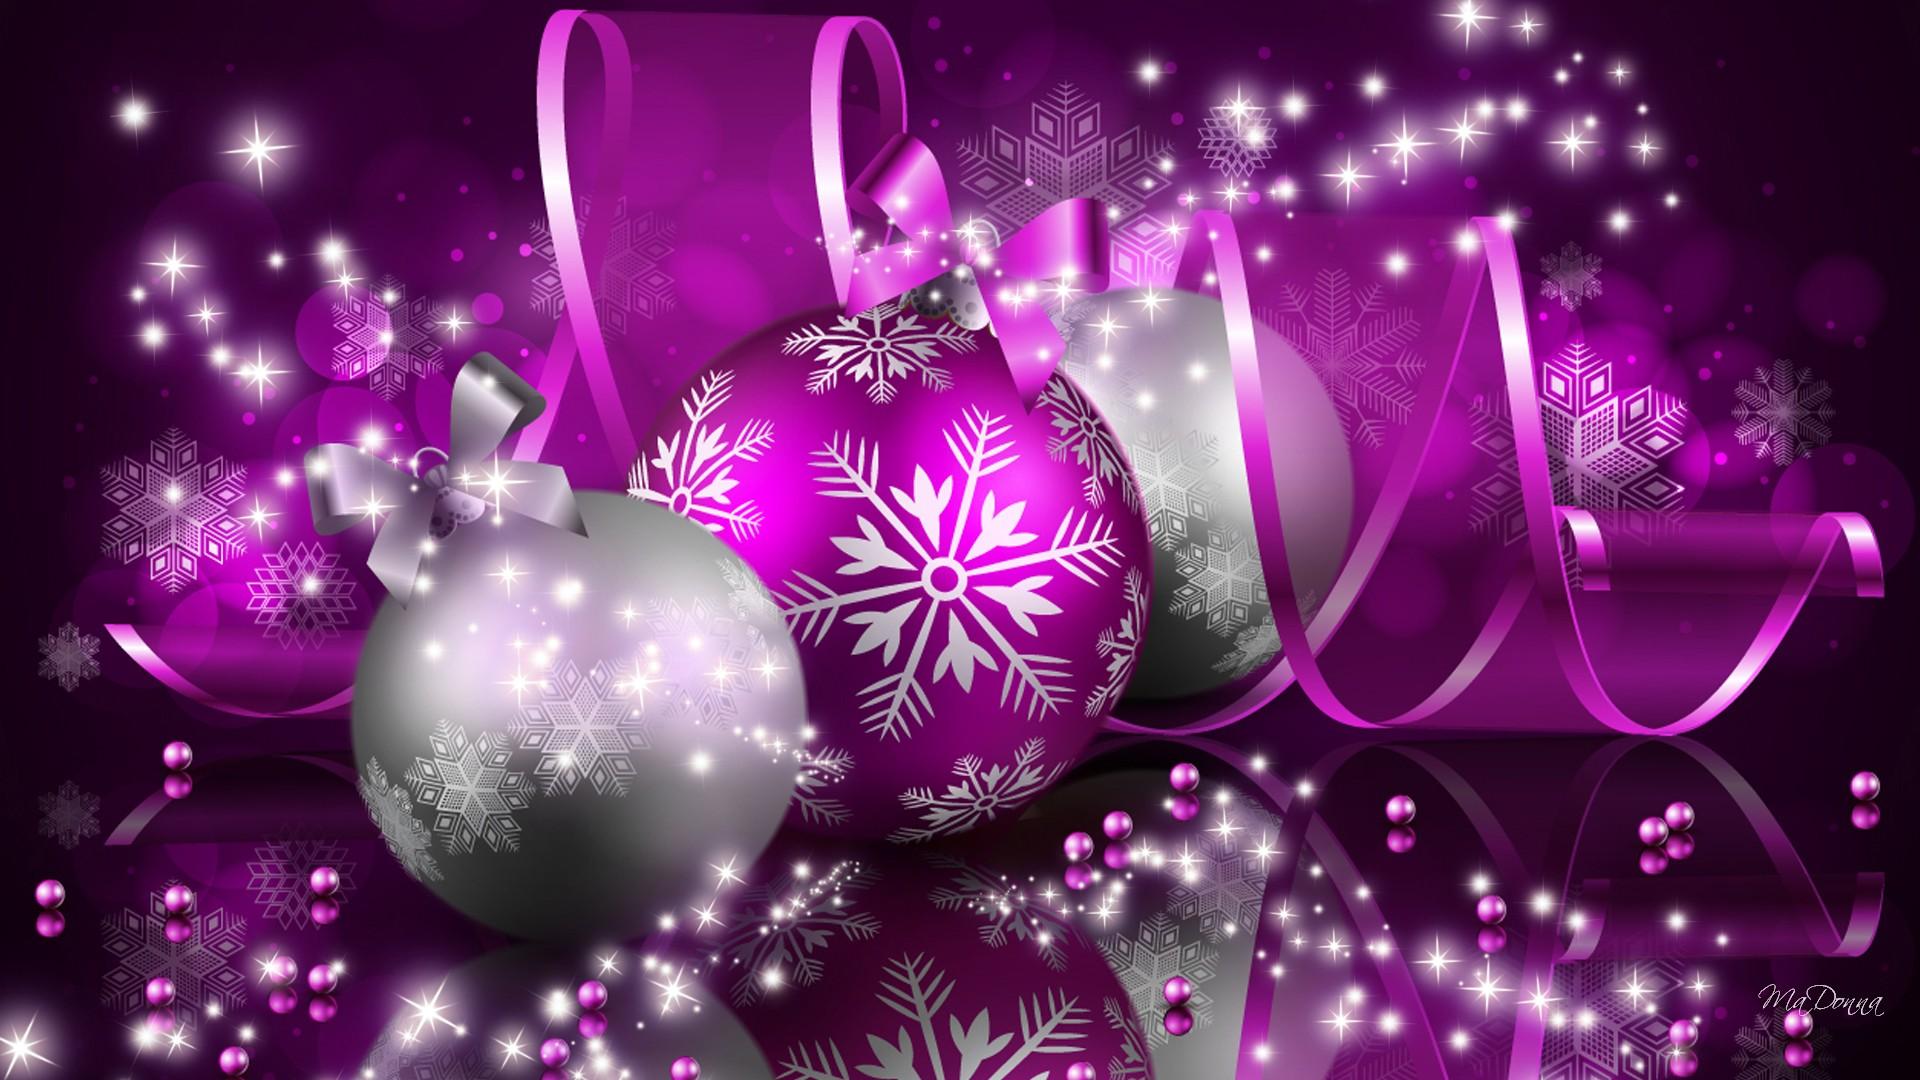 Large Christmas Backgrounds 58 images